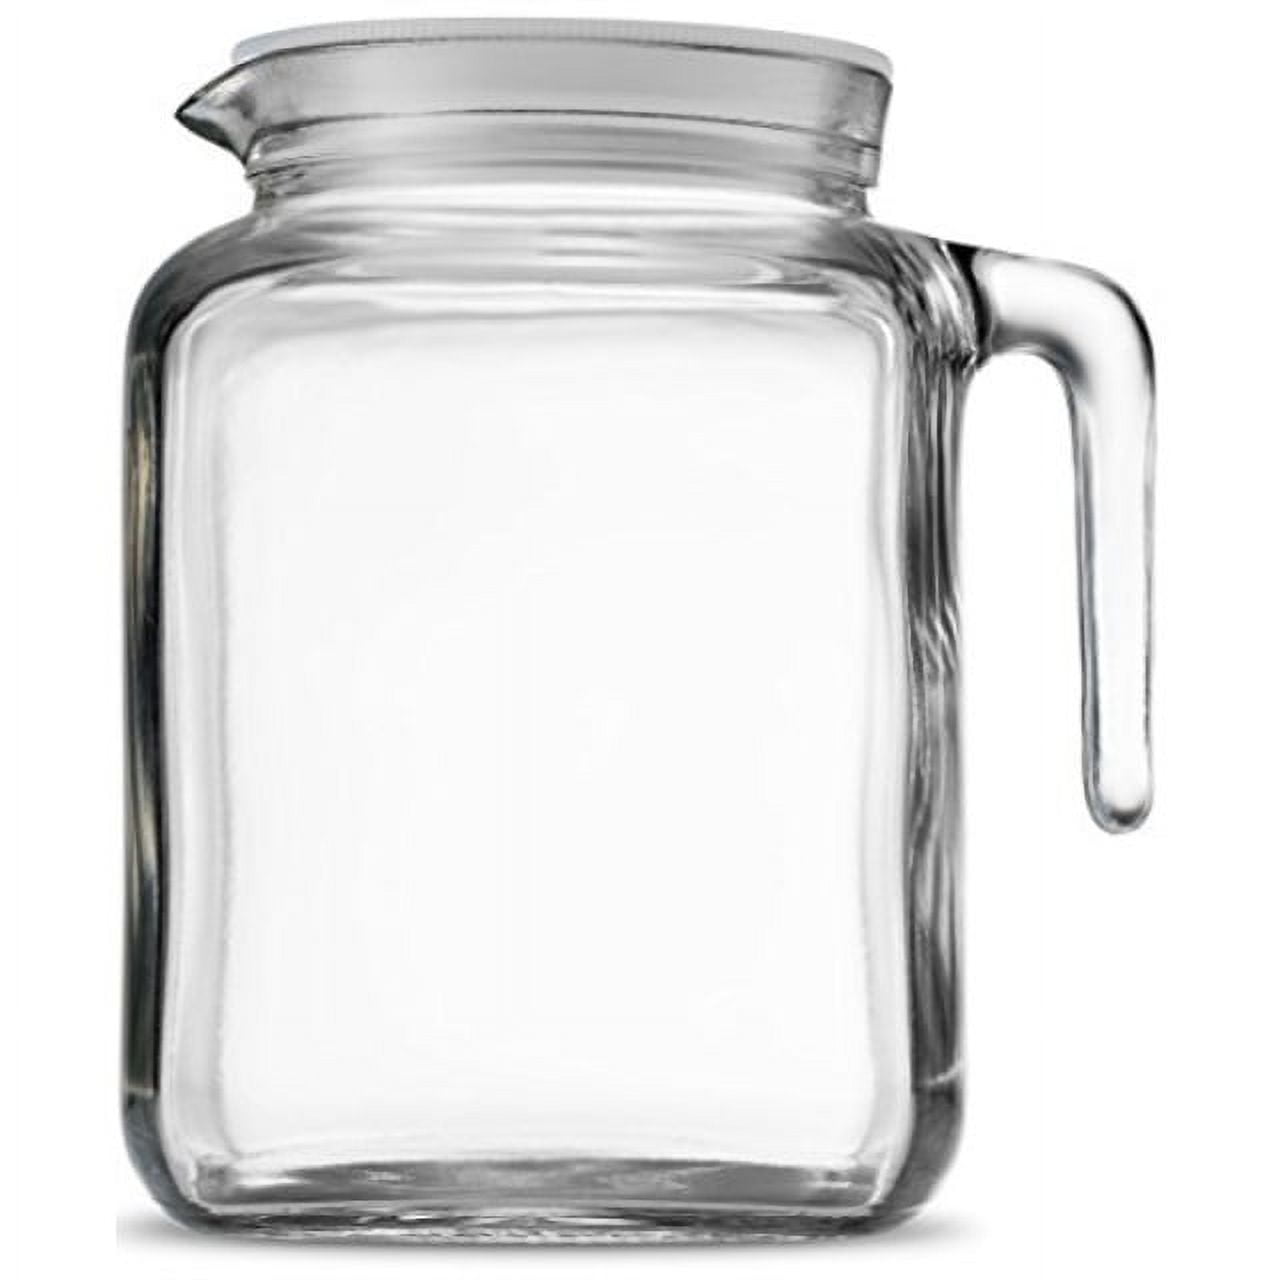 WhiteRhino 68 oz Wide Mouth Glass Pitcher with Lid and Handle